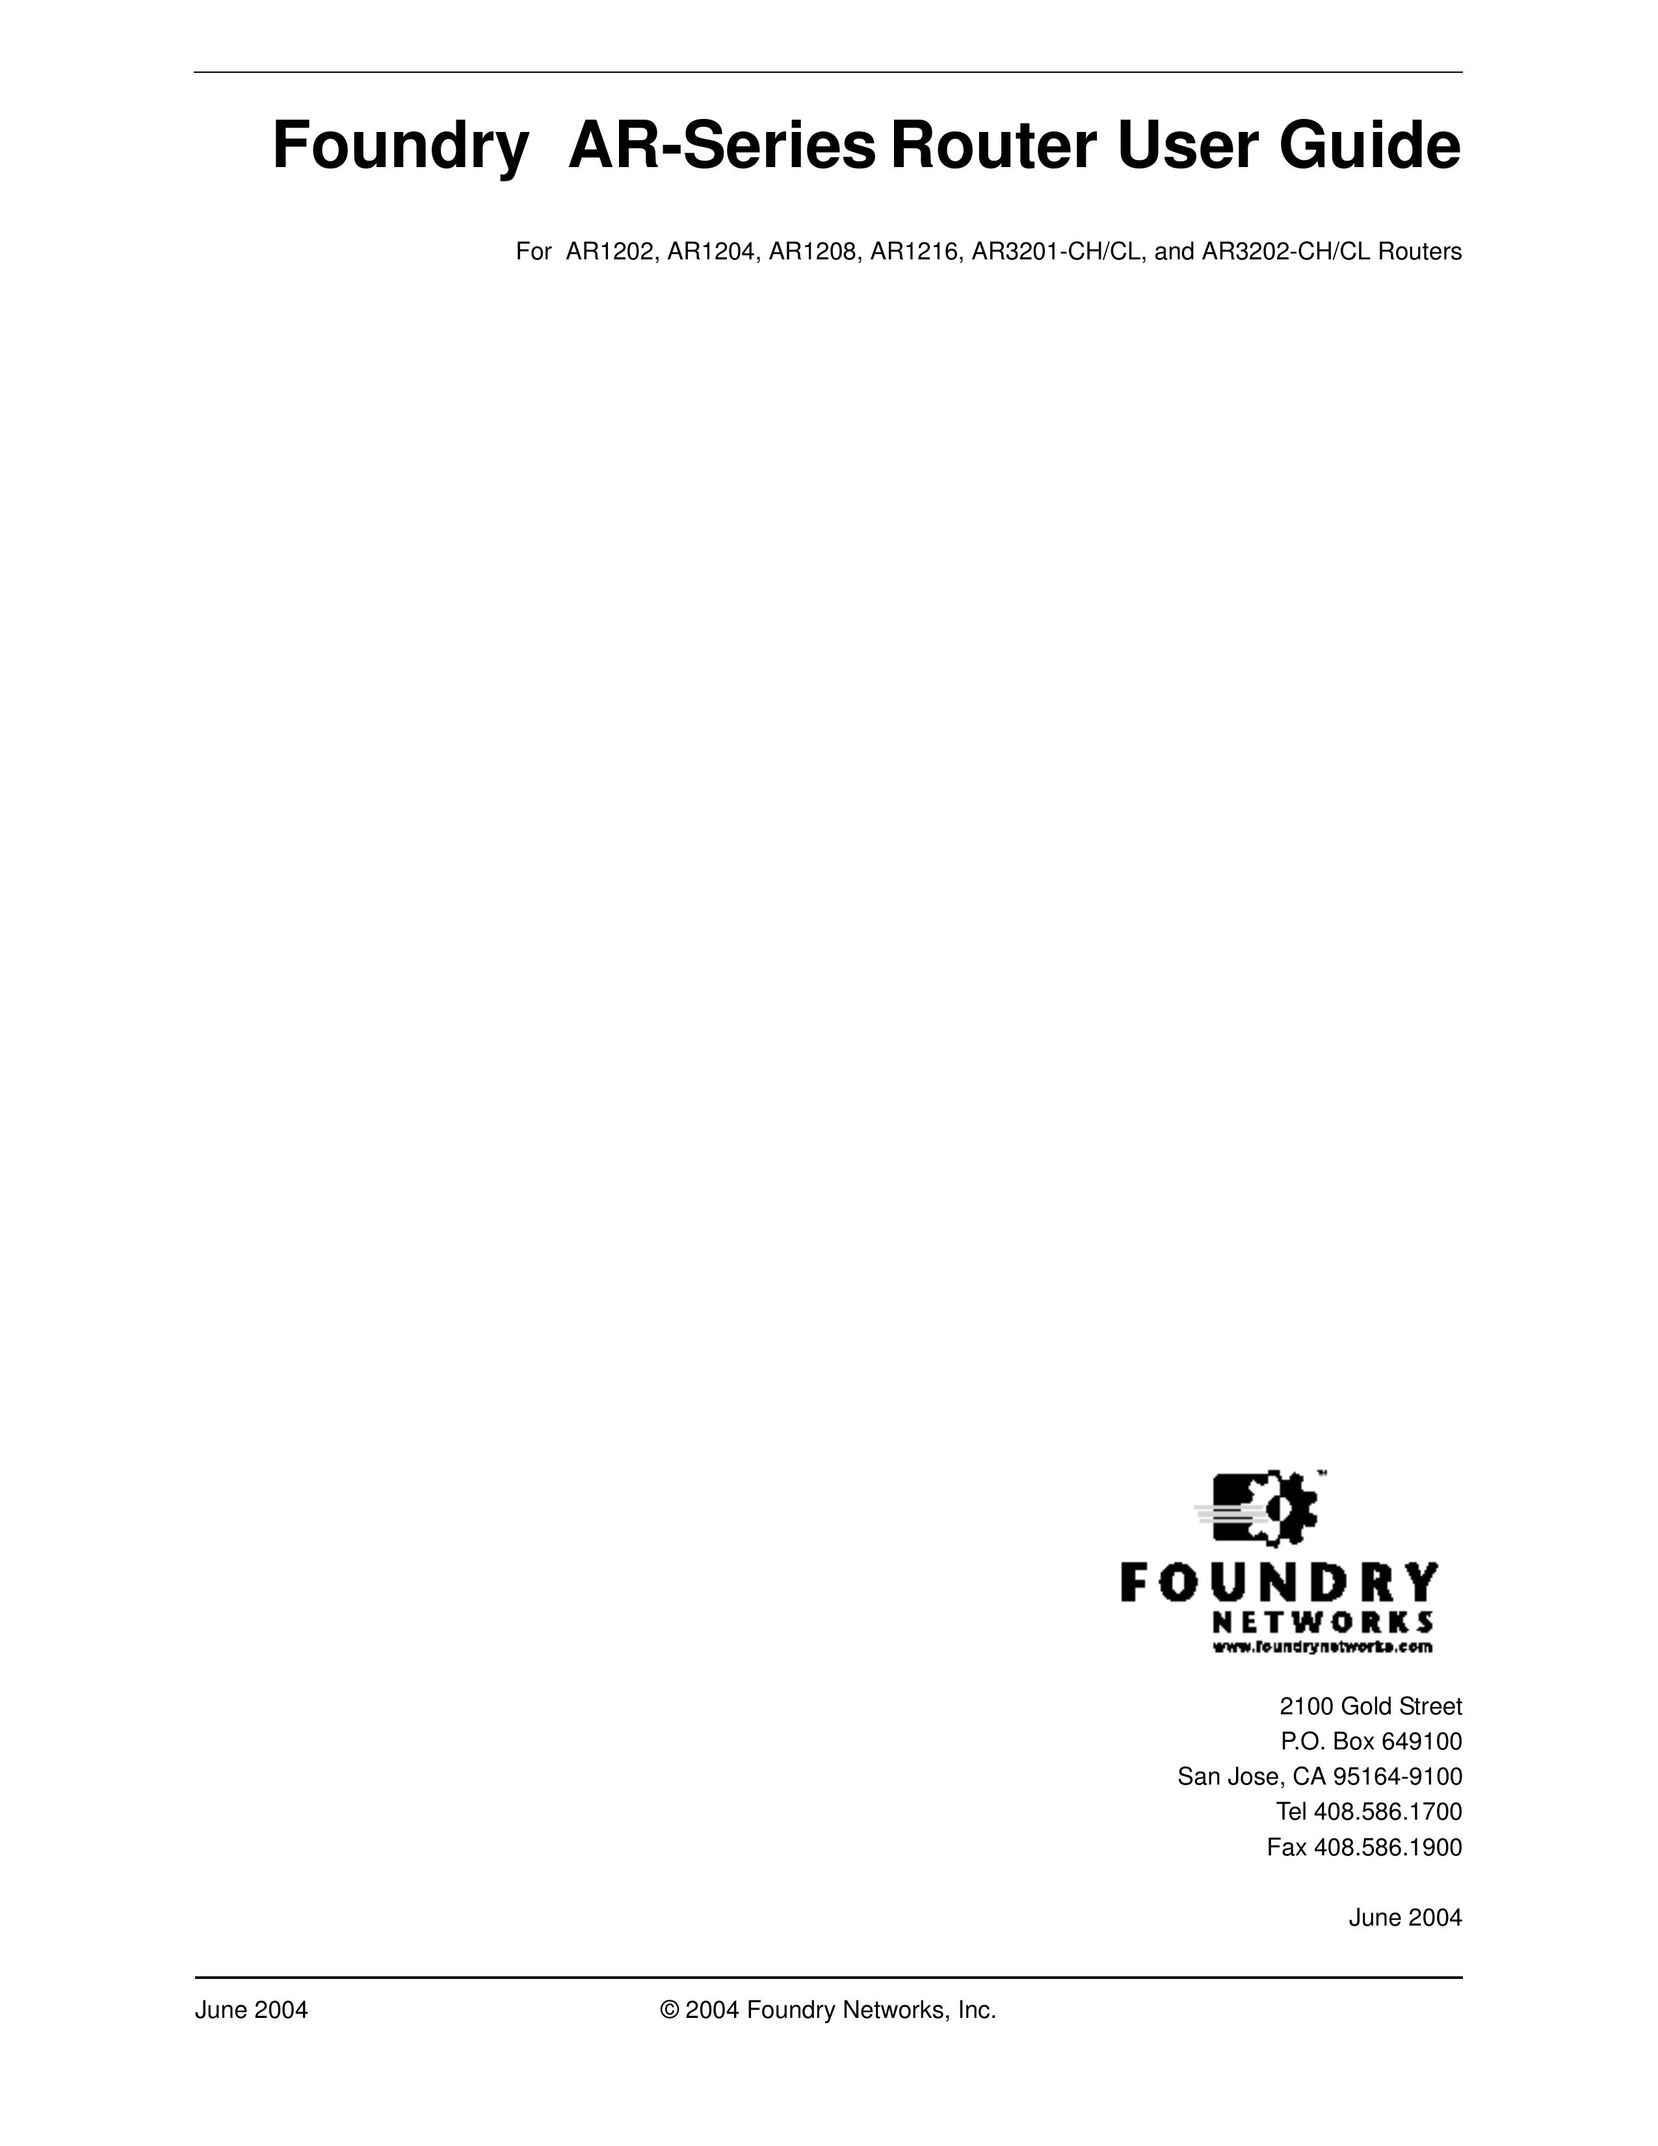 Foundry Networks AR1216 Network Router User Manual